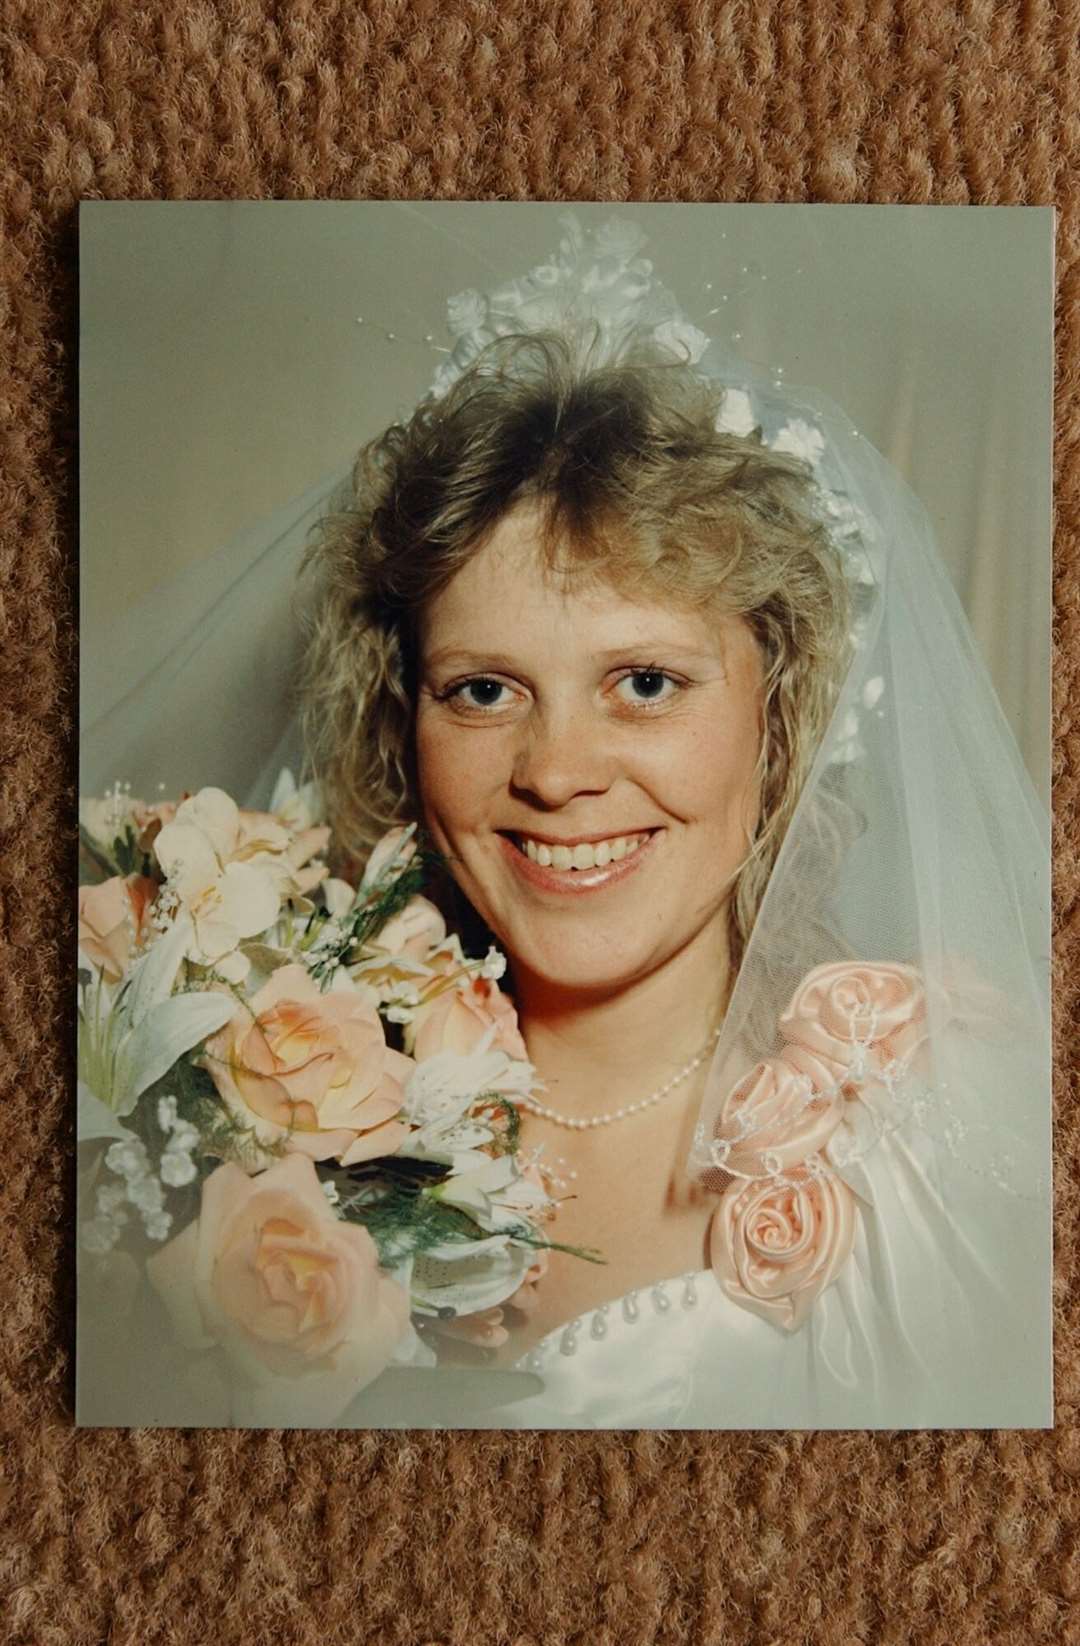 Debbie Griggs on the day she married husband Andrew, who is accused of murdering her